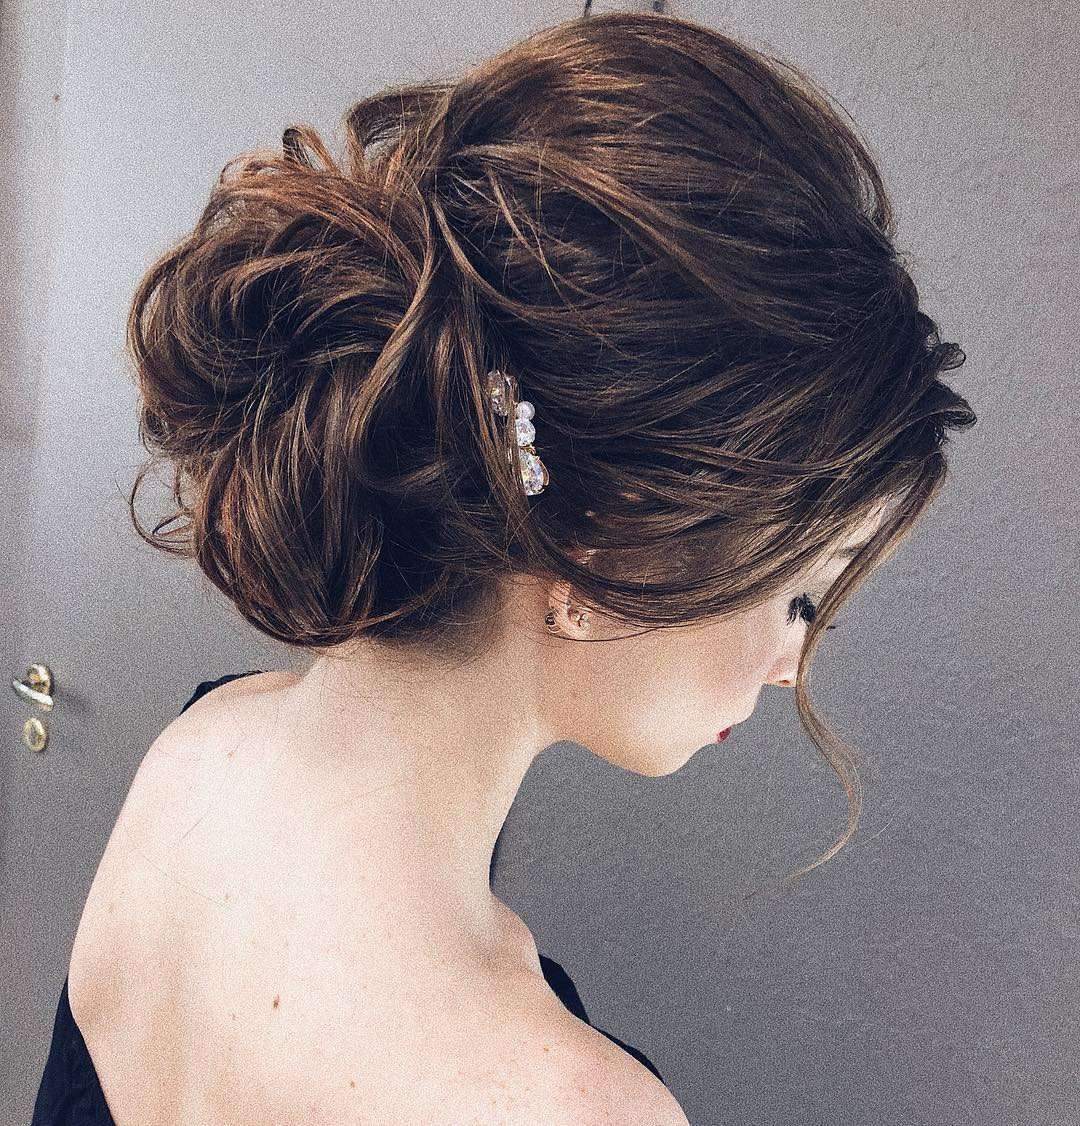 Prom Hairstyles 2020 Medium Hair
 10 Gorgeous Prom Updos for Long Hair Prom Updo Hairstyles